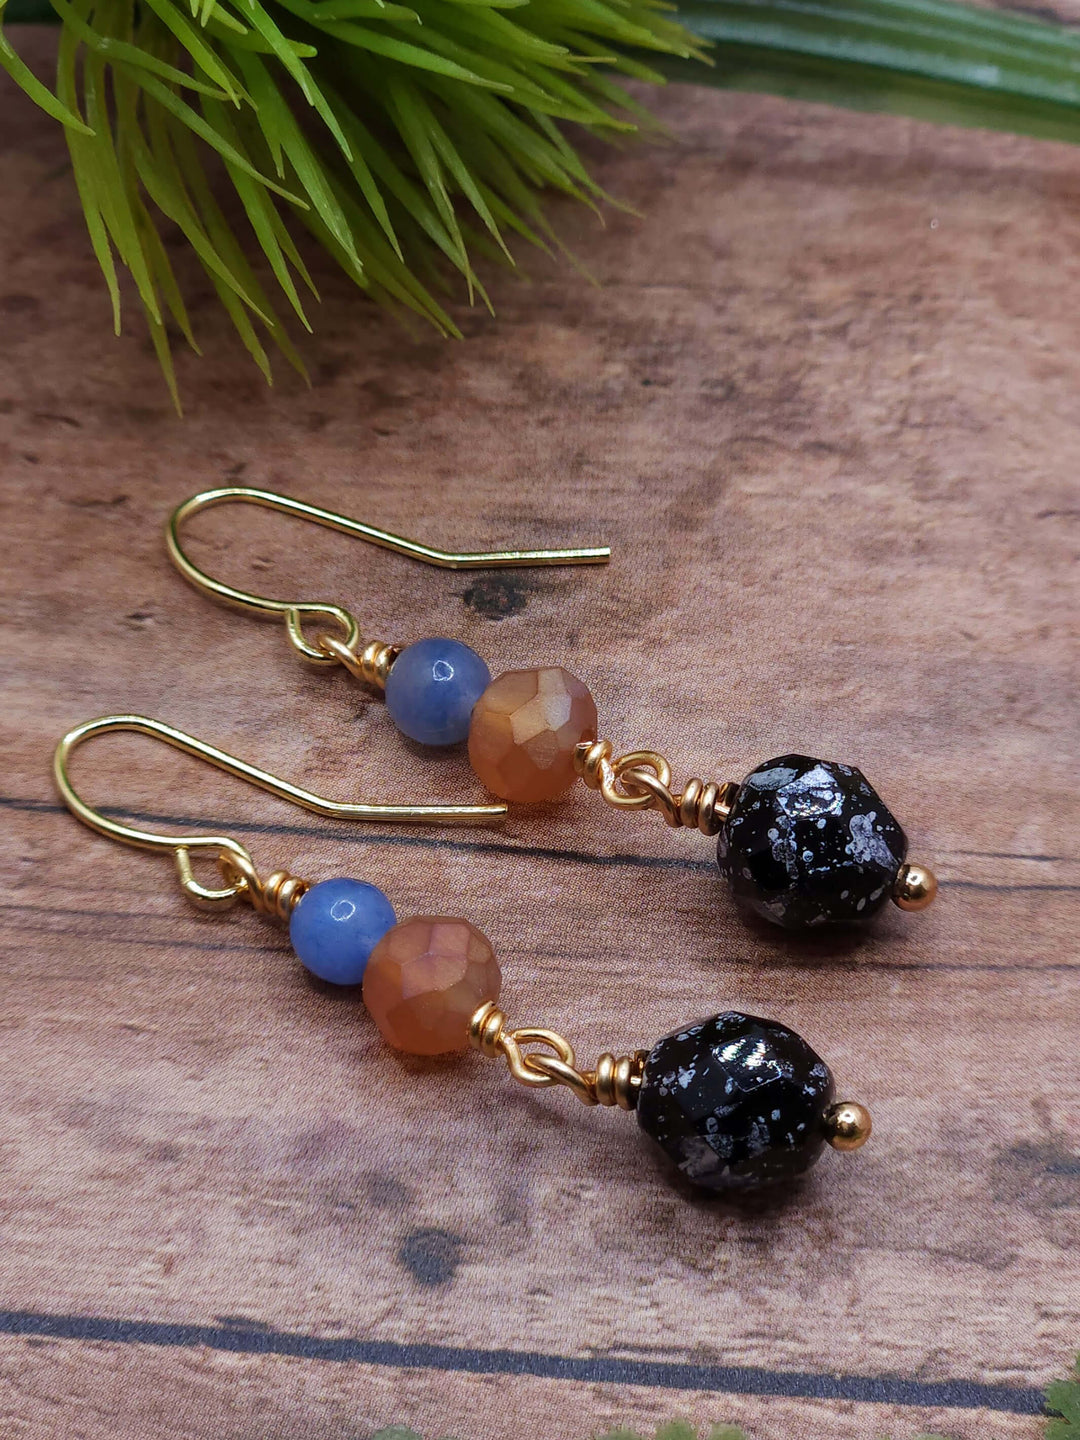 These petite earrings capture the blue, orange, and black colors of the American Kestral, with gold filled ear wires. 